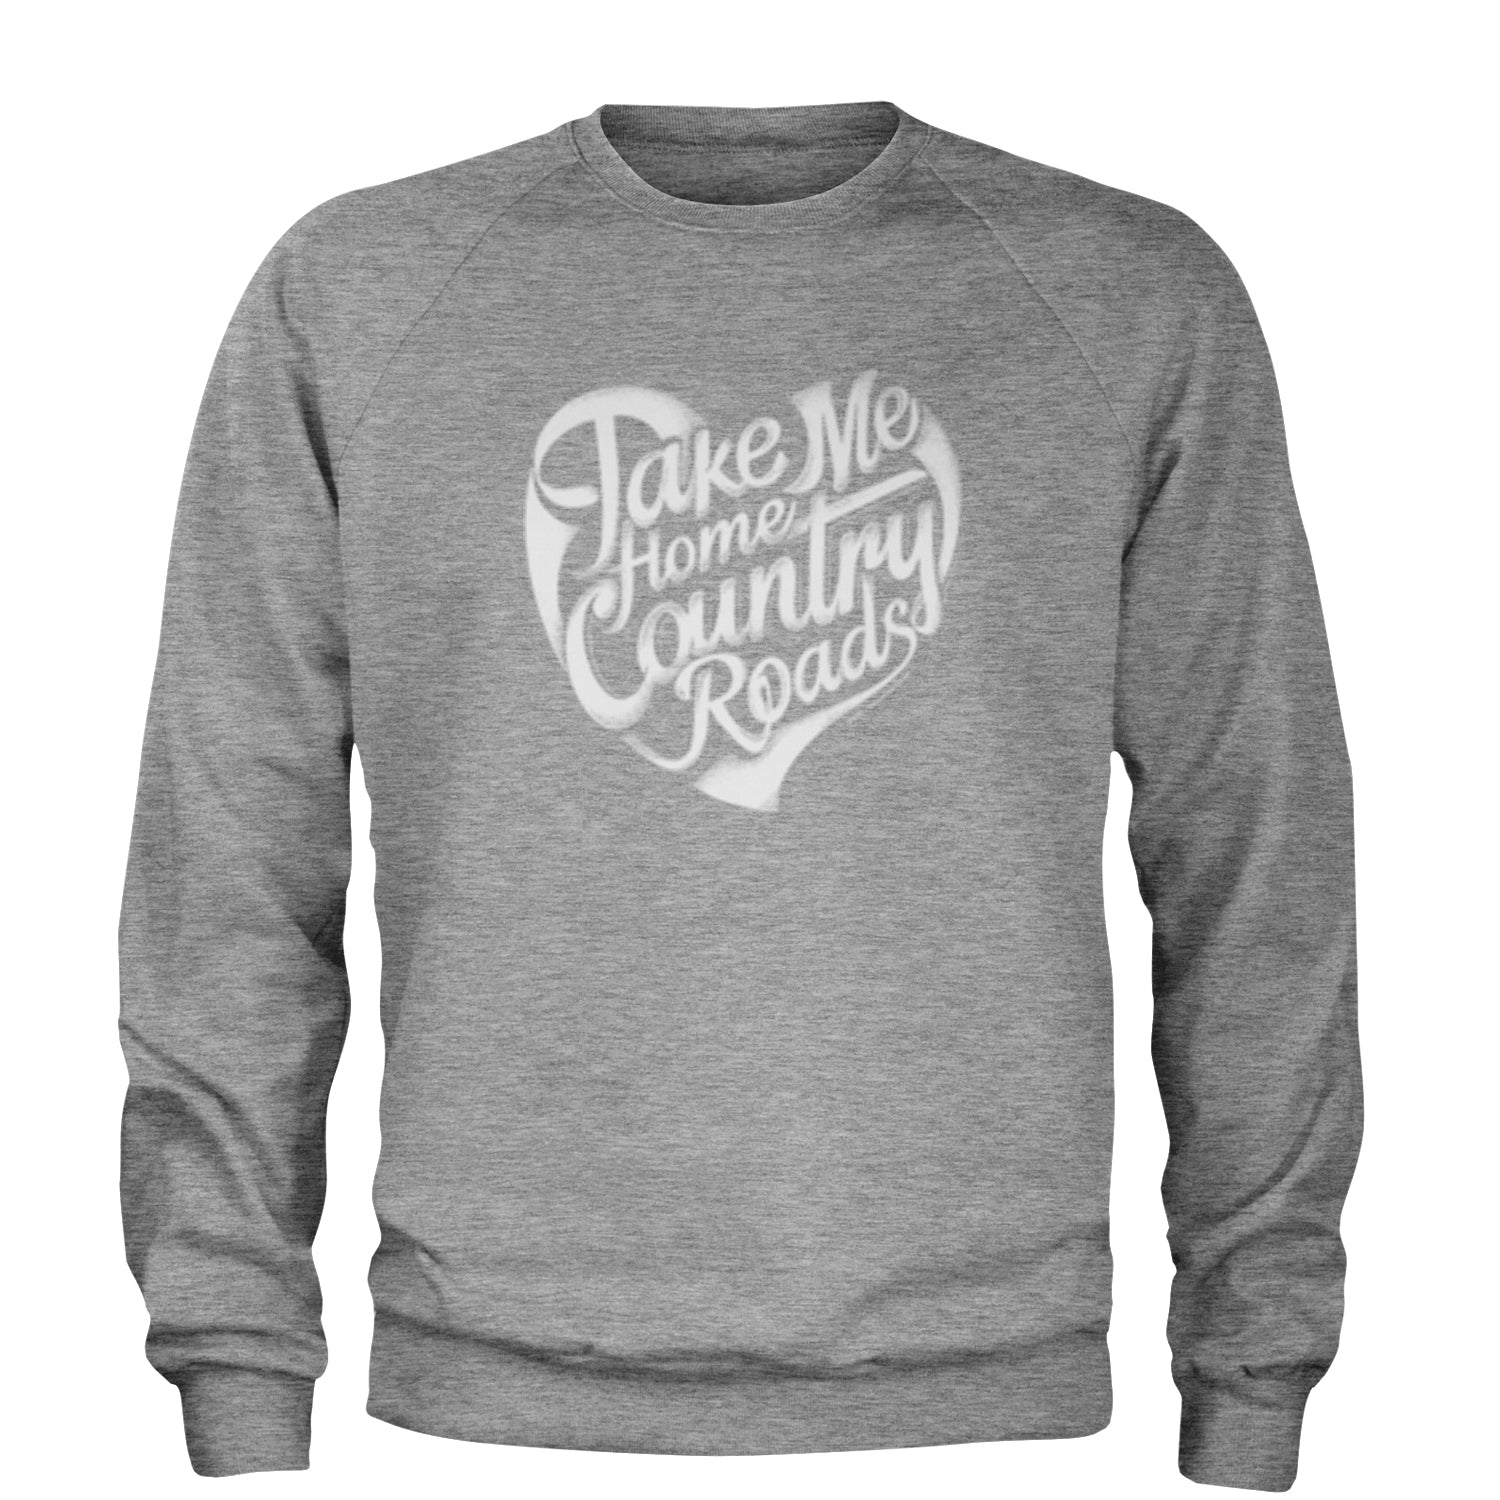 Take Me Home Country Roads Adult Crewneck Sweatshirt country, karaoke, roads by Expression Tees